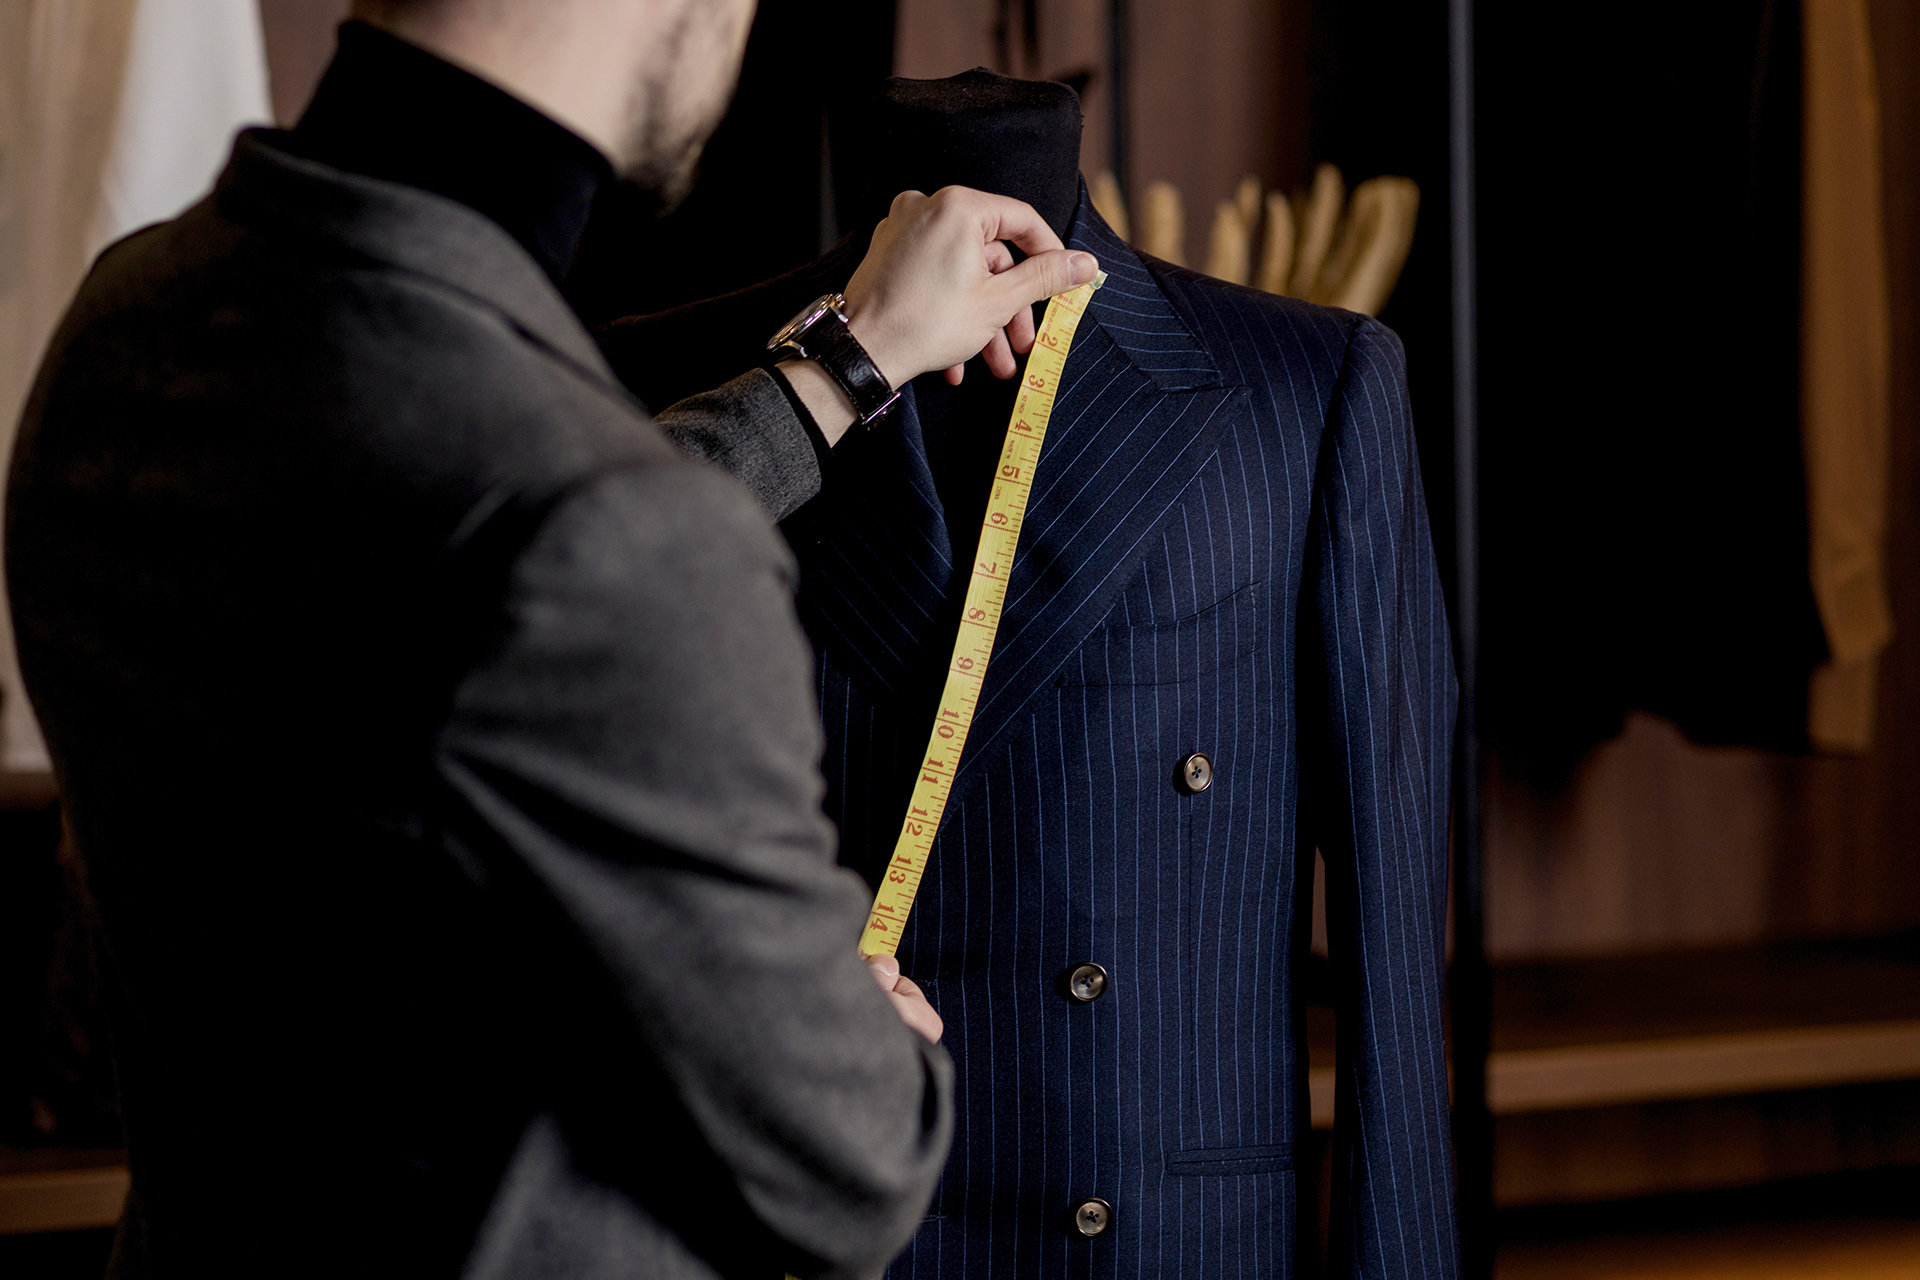 bespoke suit made according to your measurements